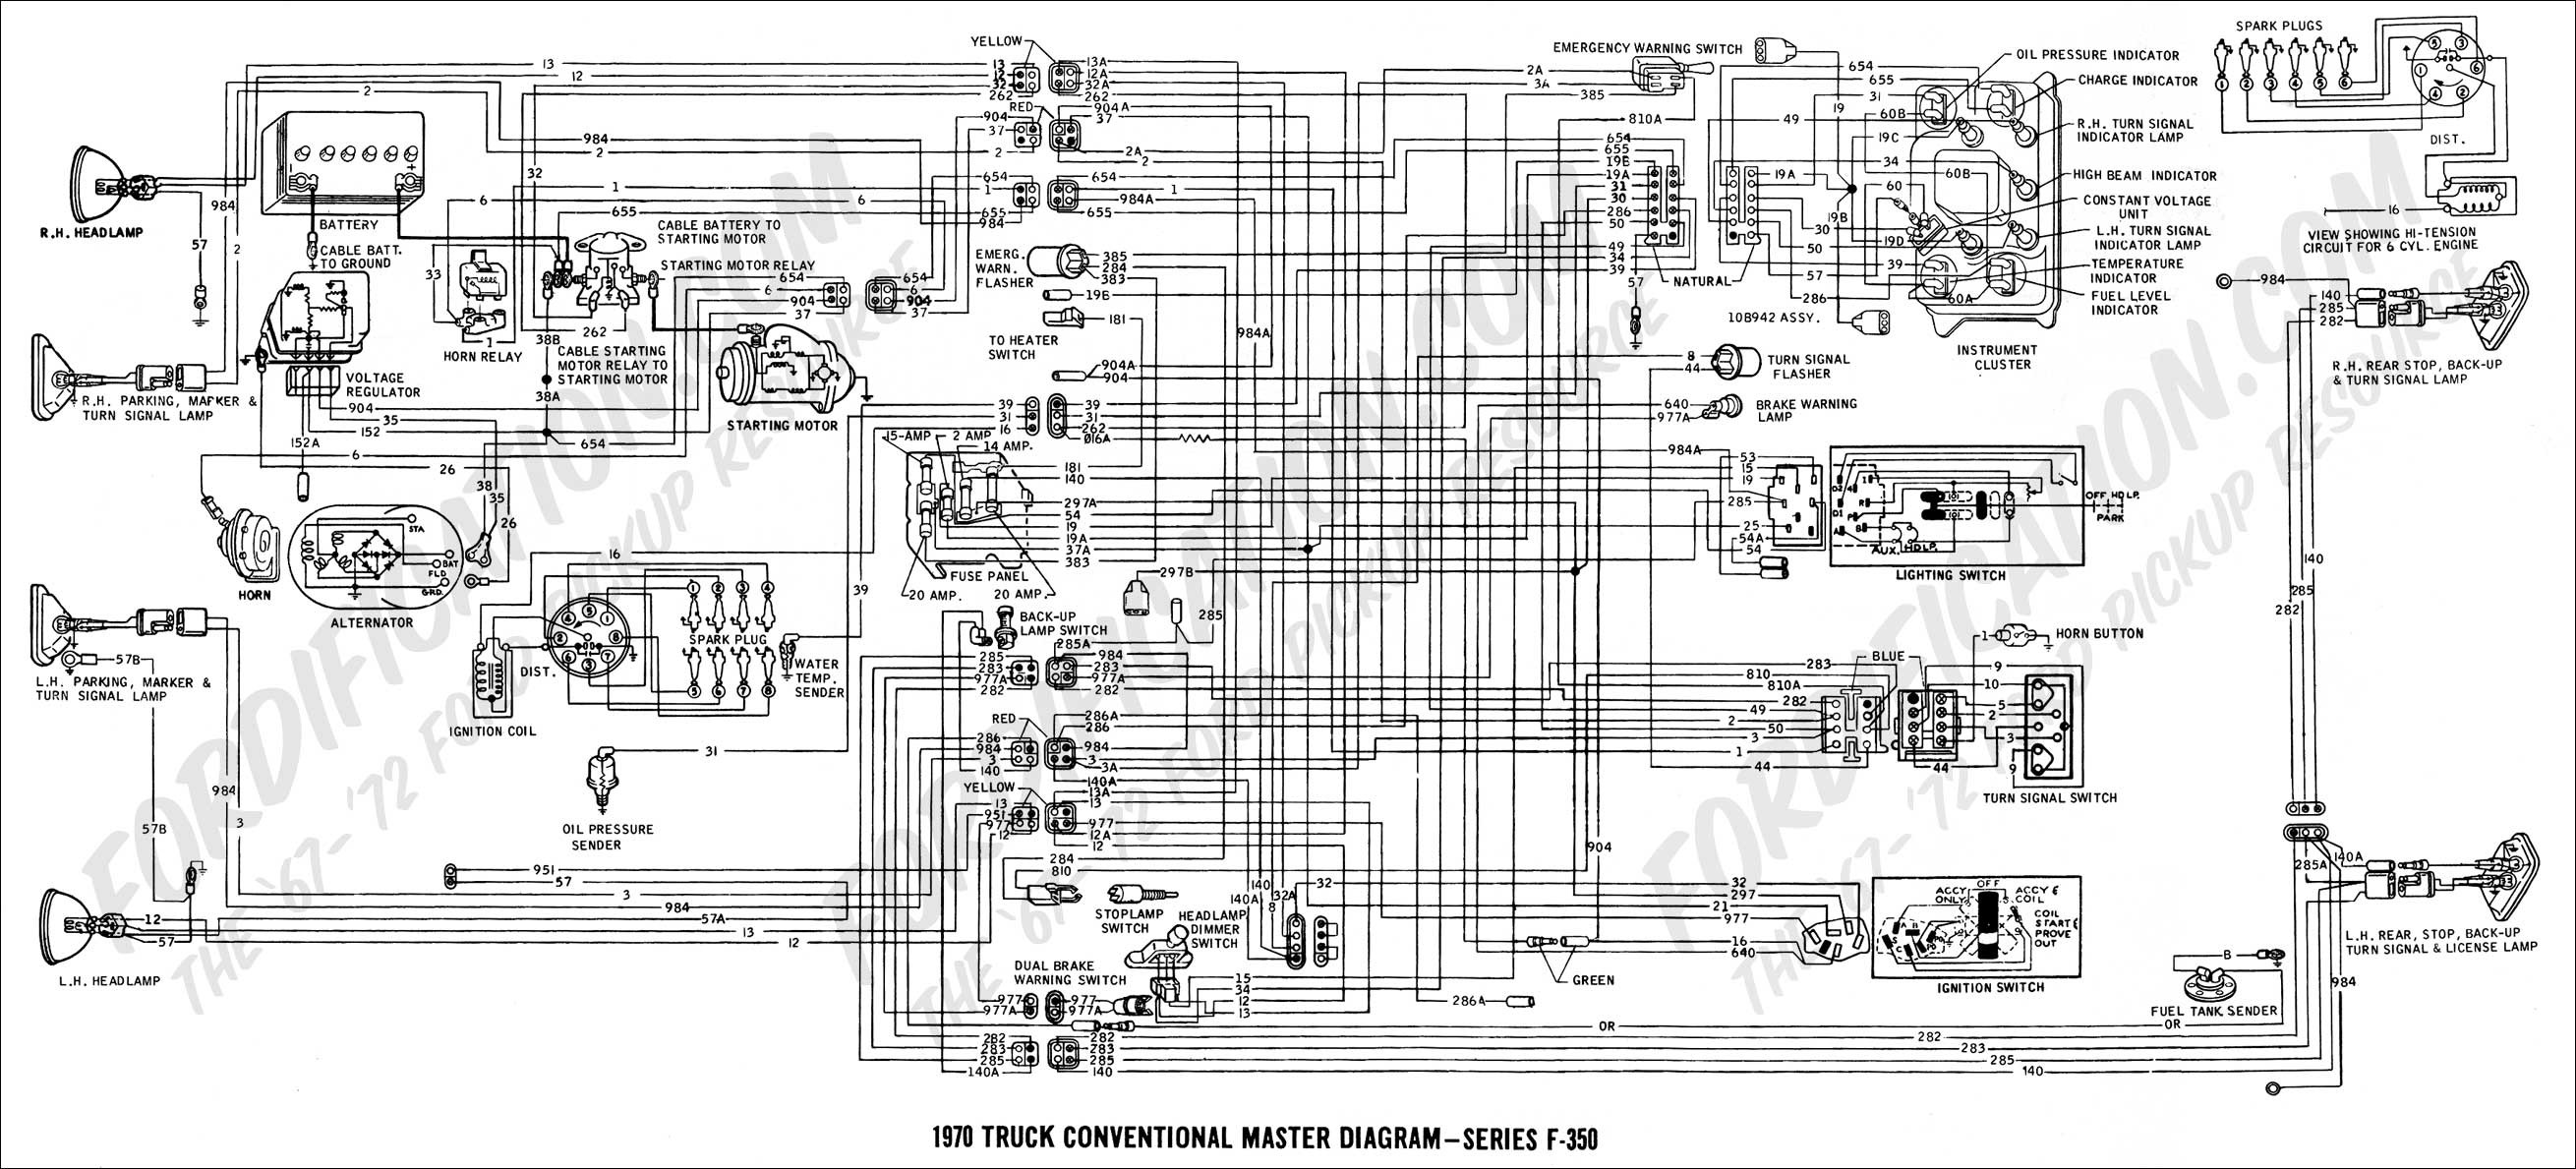 Tail Light Wiring Diagram ford F150 2000 ford F 250 Wiring Diagram Also 2006 ford E250 Van Wiring Of Tail Light Wiring Diagram ford F150